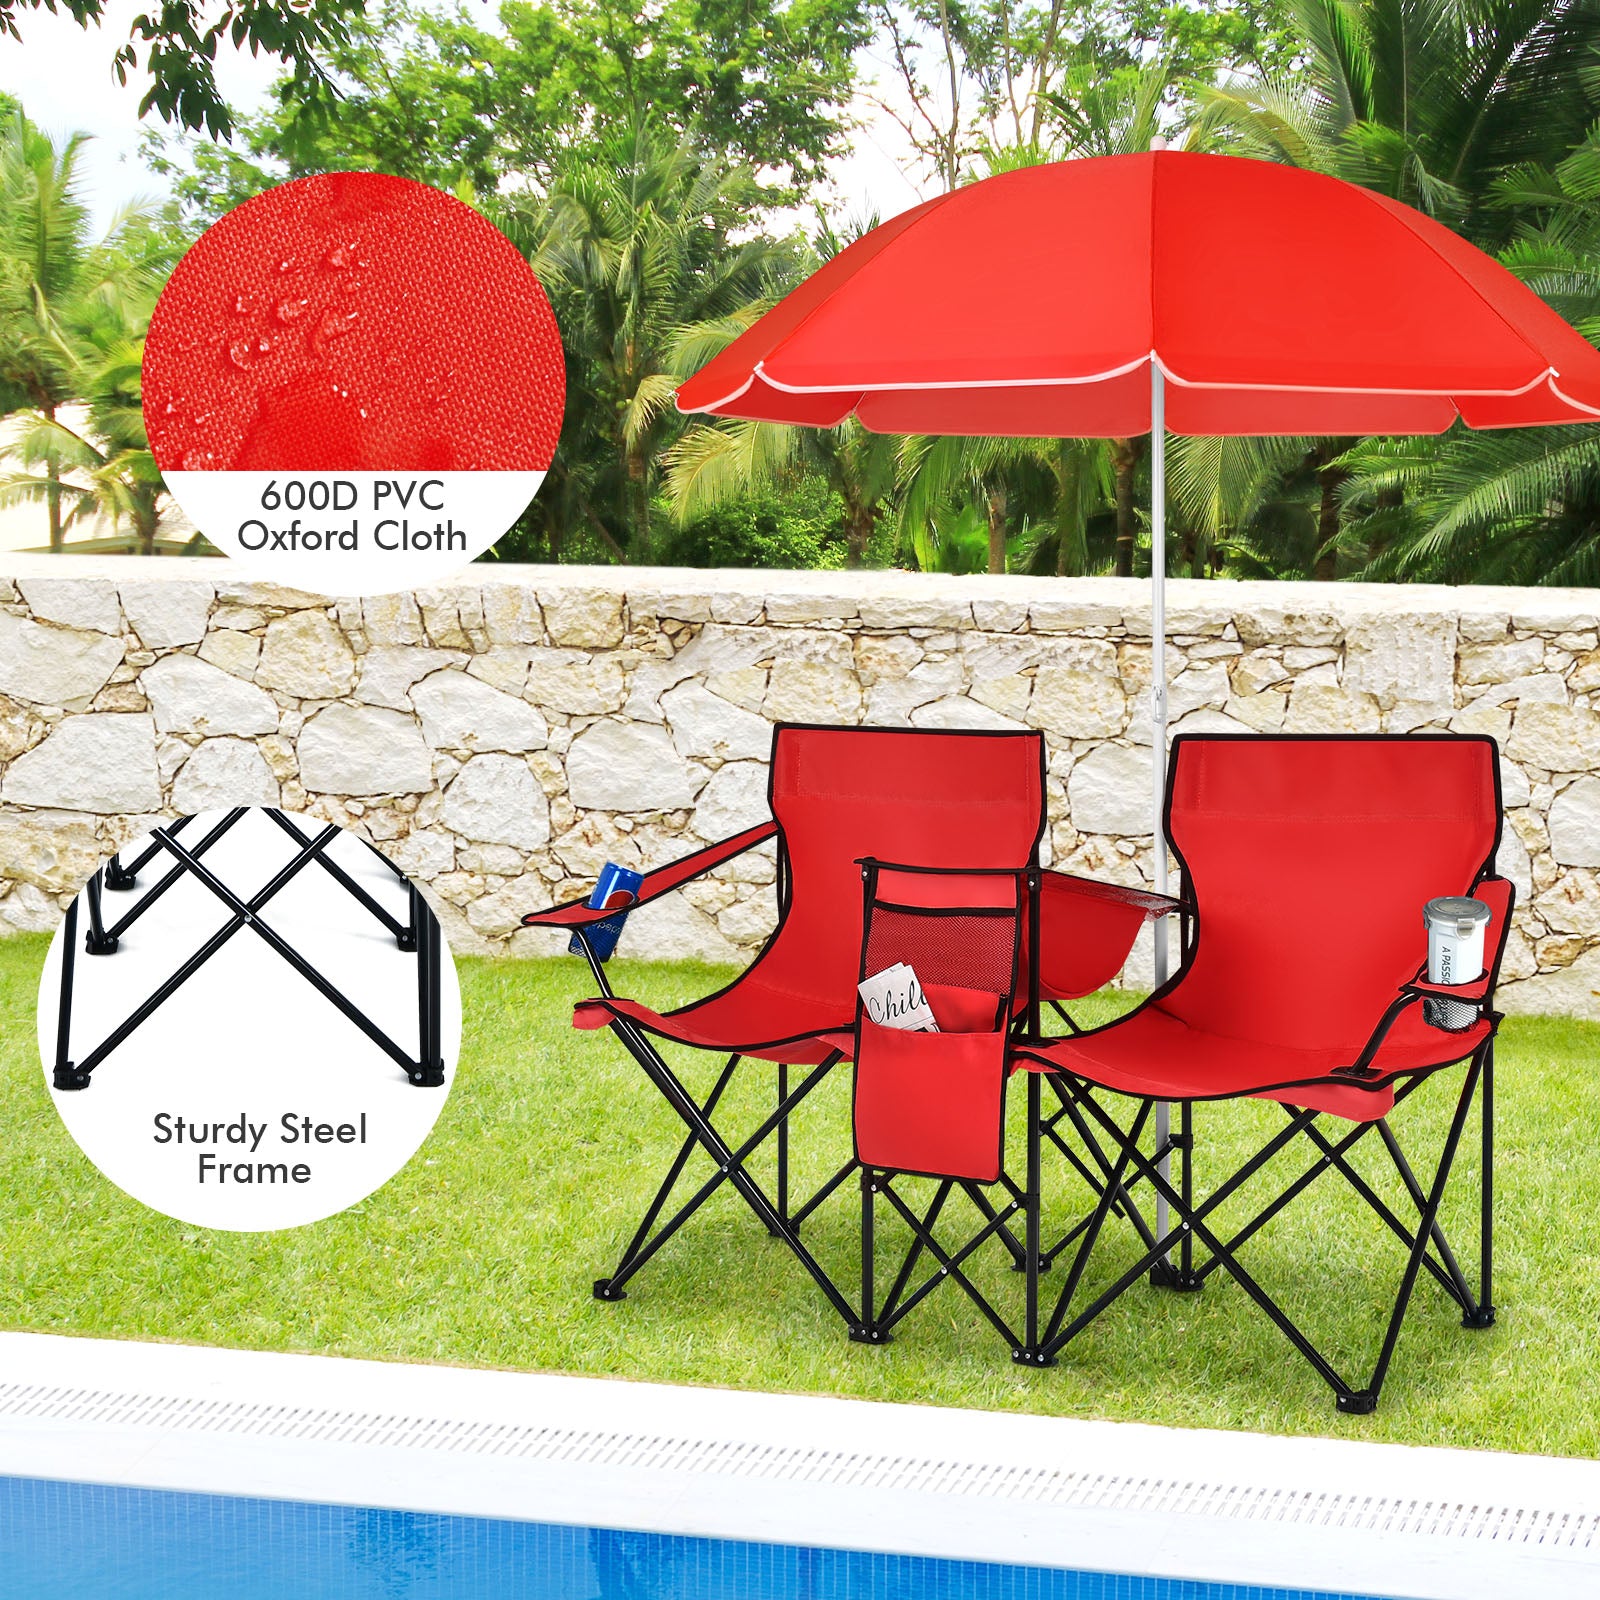 Weather-Resistant Materials: To withstand outdoor conditions, these loveseat camp chairs are made with waterproof Oxford cloth and a rustproof steel frame with a powder-coated finish. The sturdy X-shaped design and anti-slip foot pads ensure each chair has a strong loading capacity of up to 270 lbs.